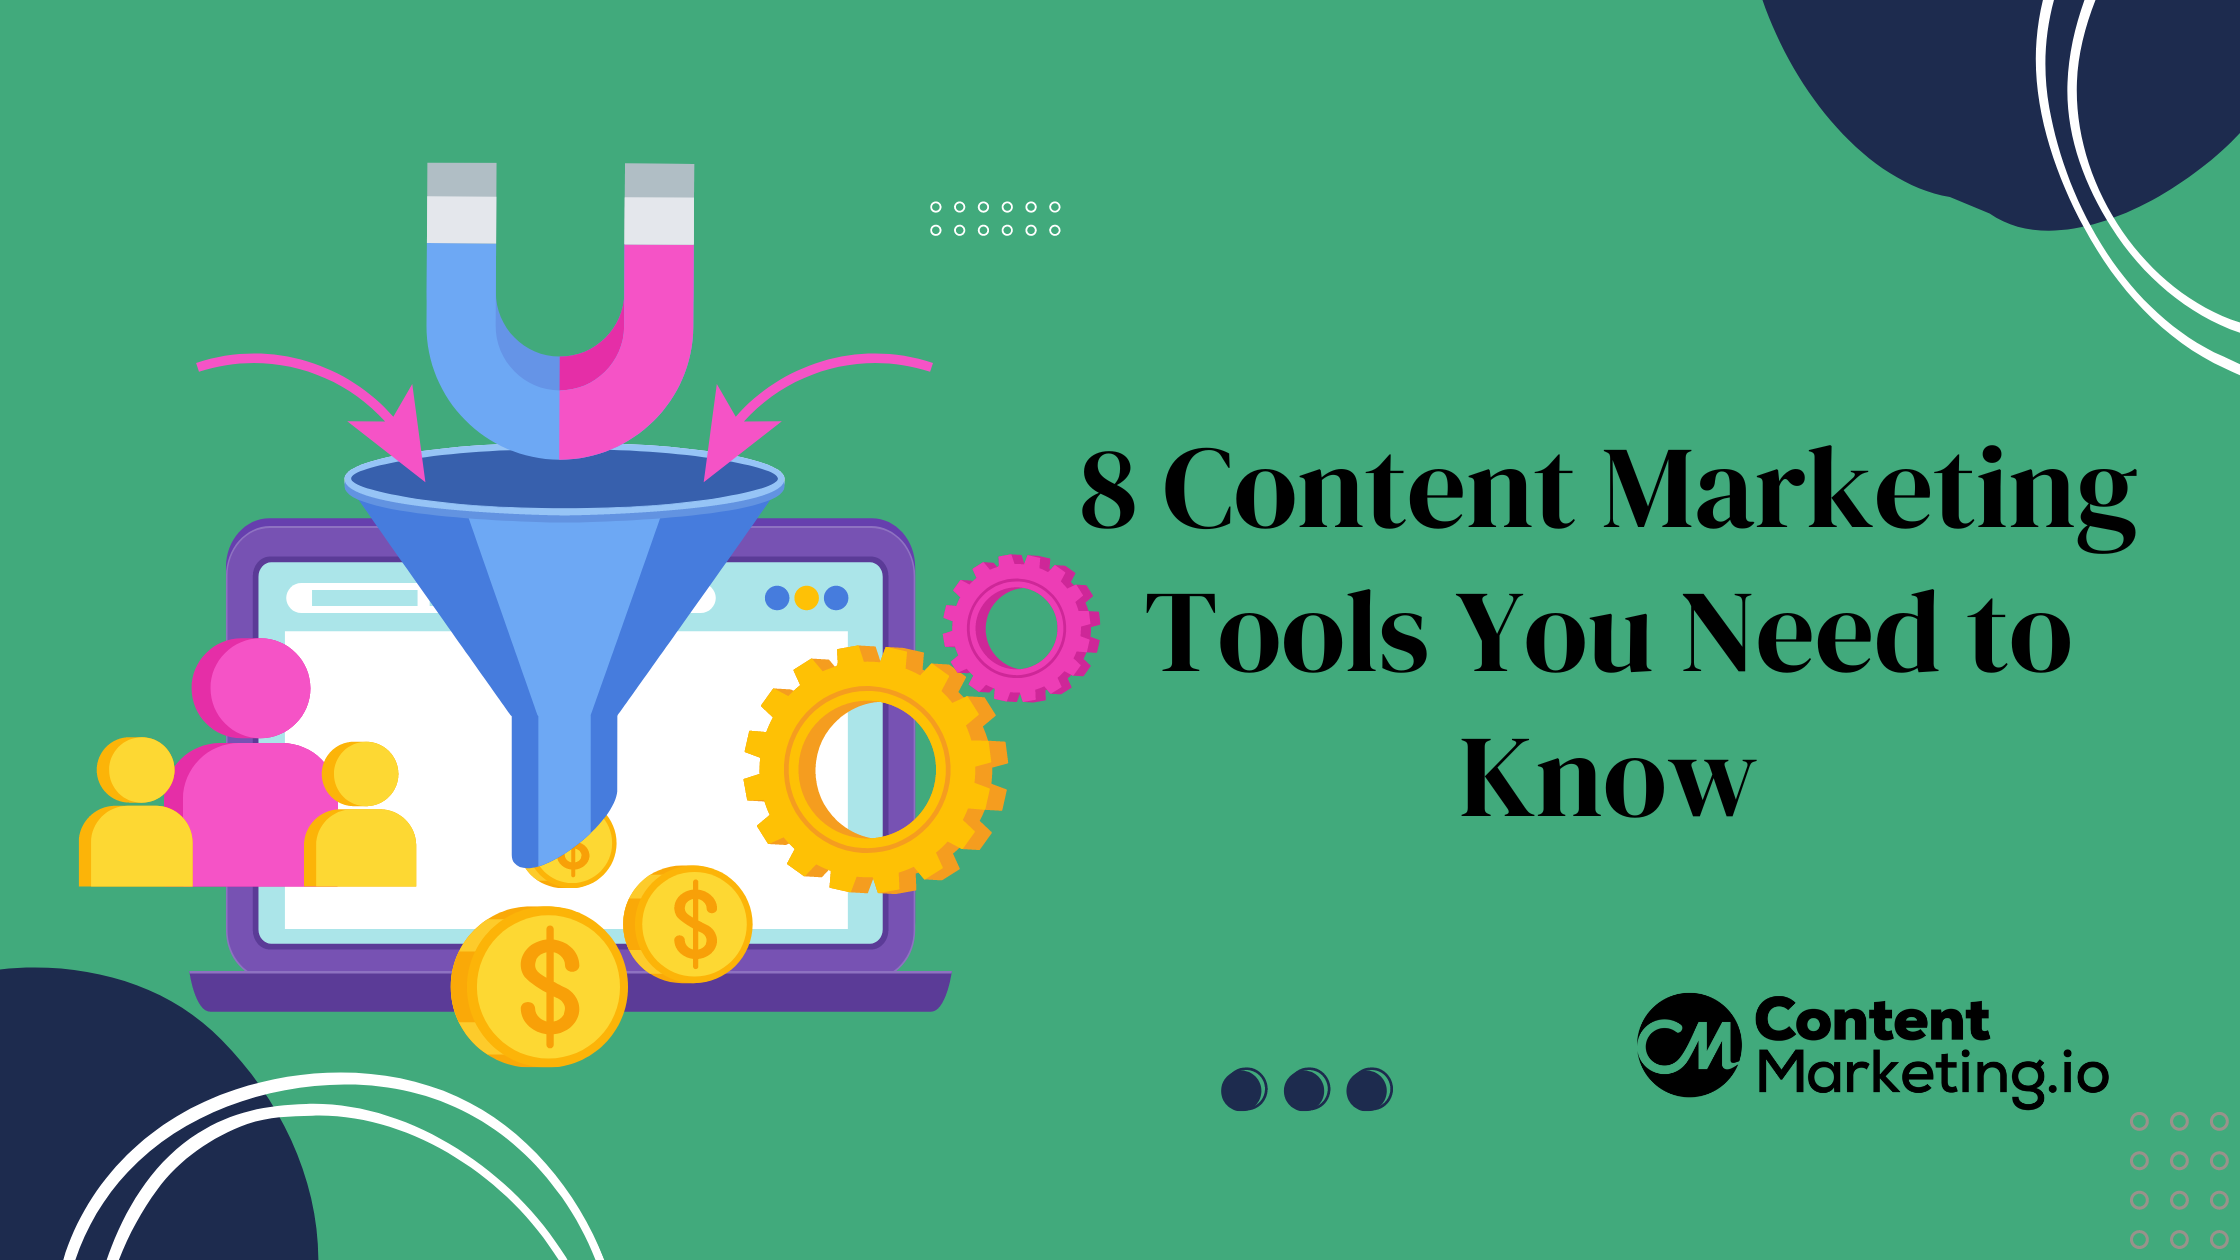 8 Content Marketing Tools You Need to Know